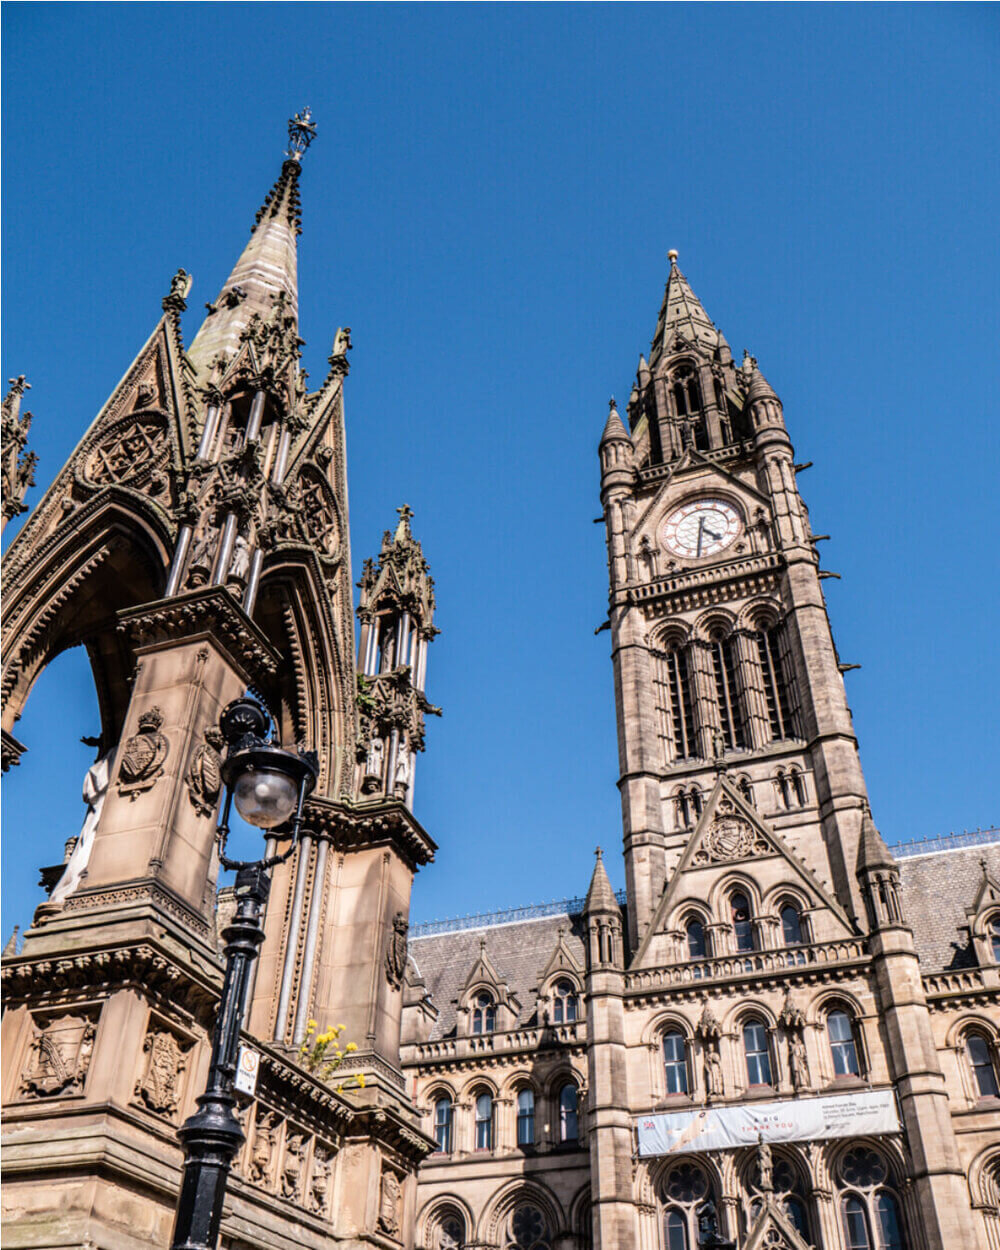 Manchester’s Town hall bell tower 